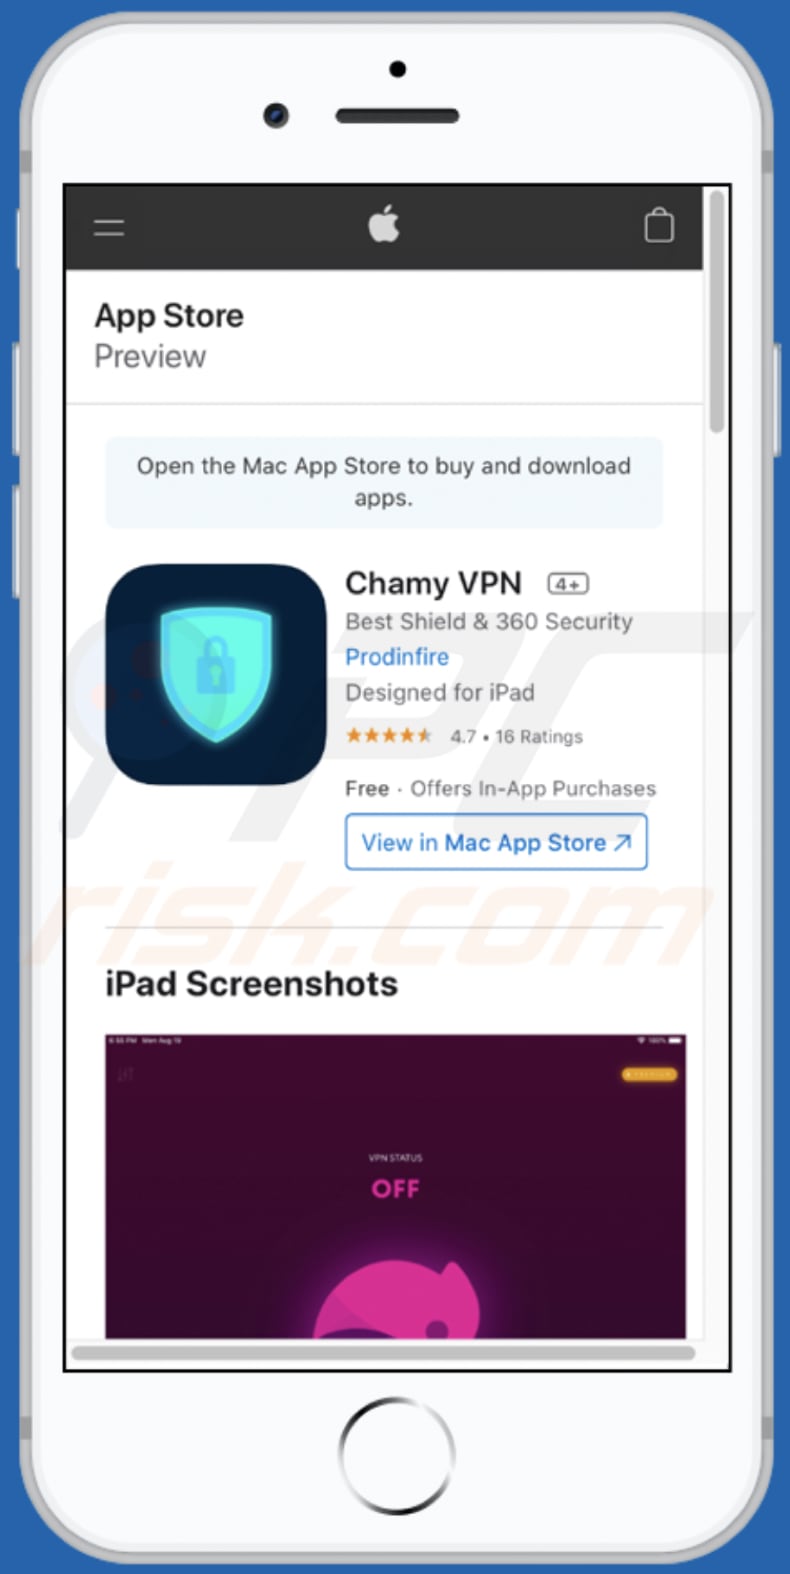 appleconnect.safellk.com scam app promoted on the second variant